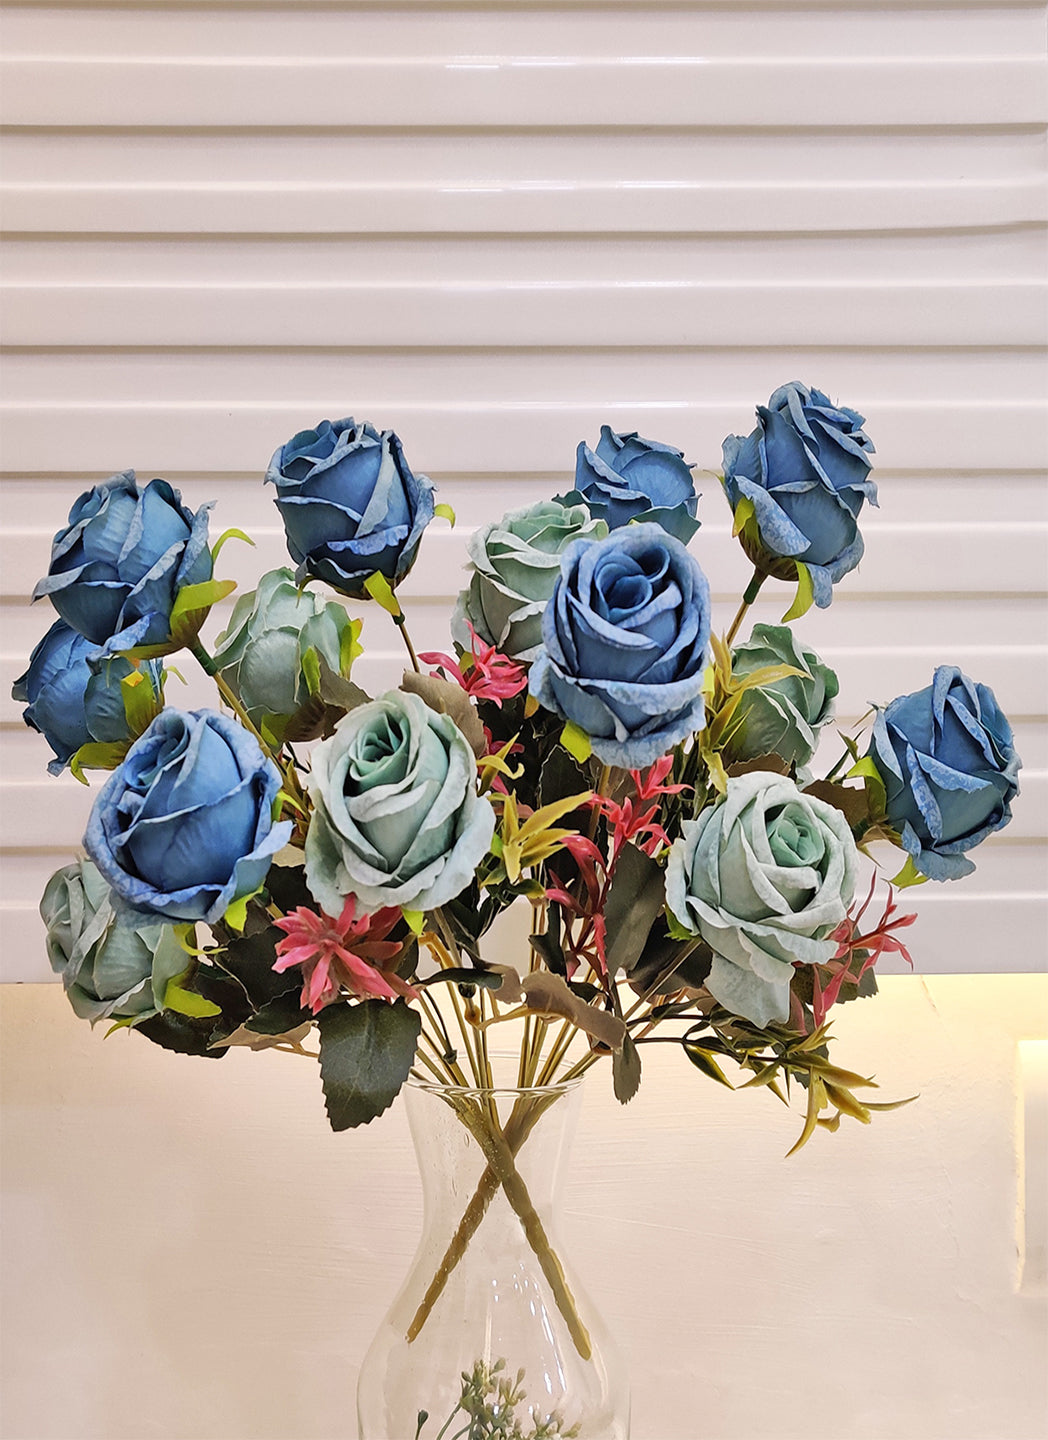 Enchanting Elegance: Artificial Blue Rose Flower For Vase Filler, Home Decoration, DIY craft And Many More, Combo pack of 2 Pieces, Without Vase